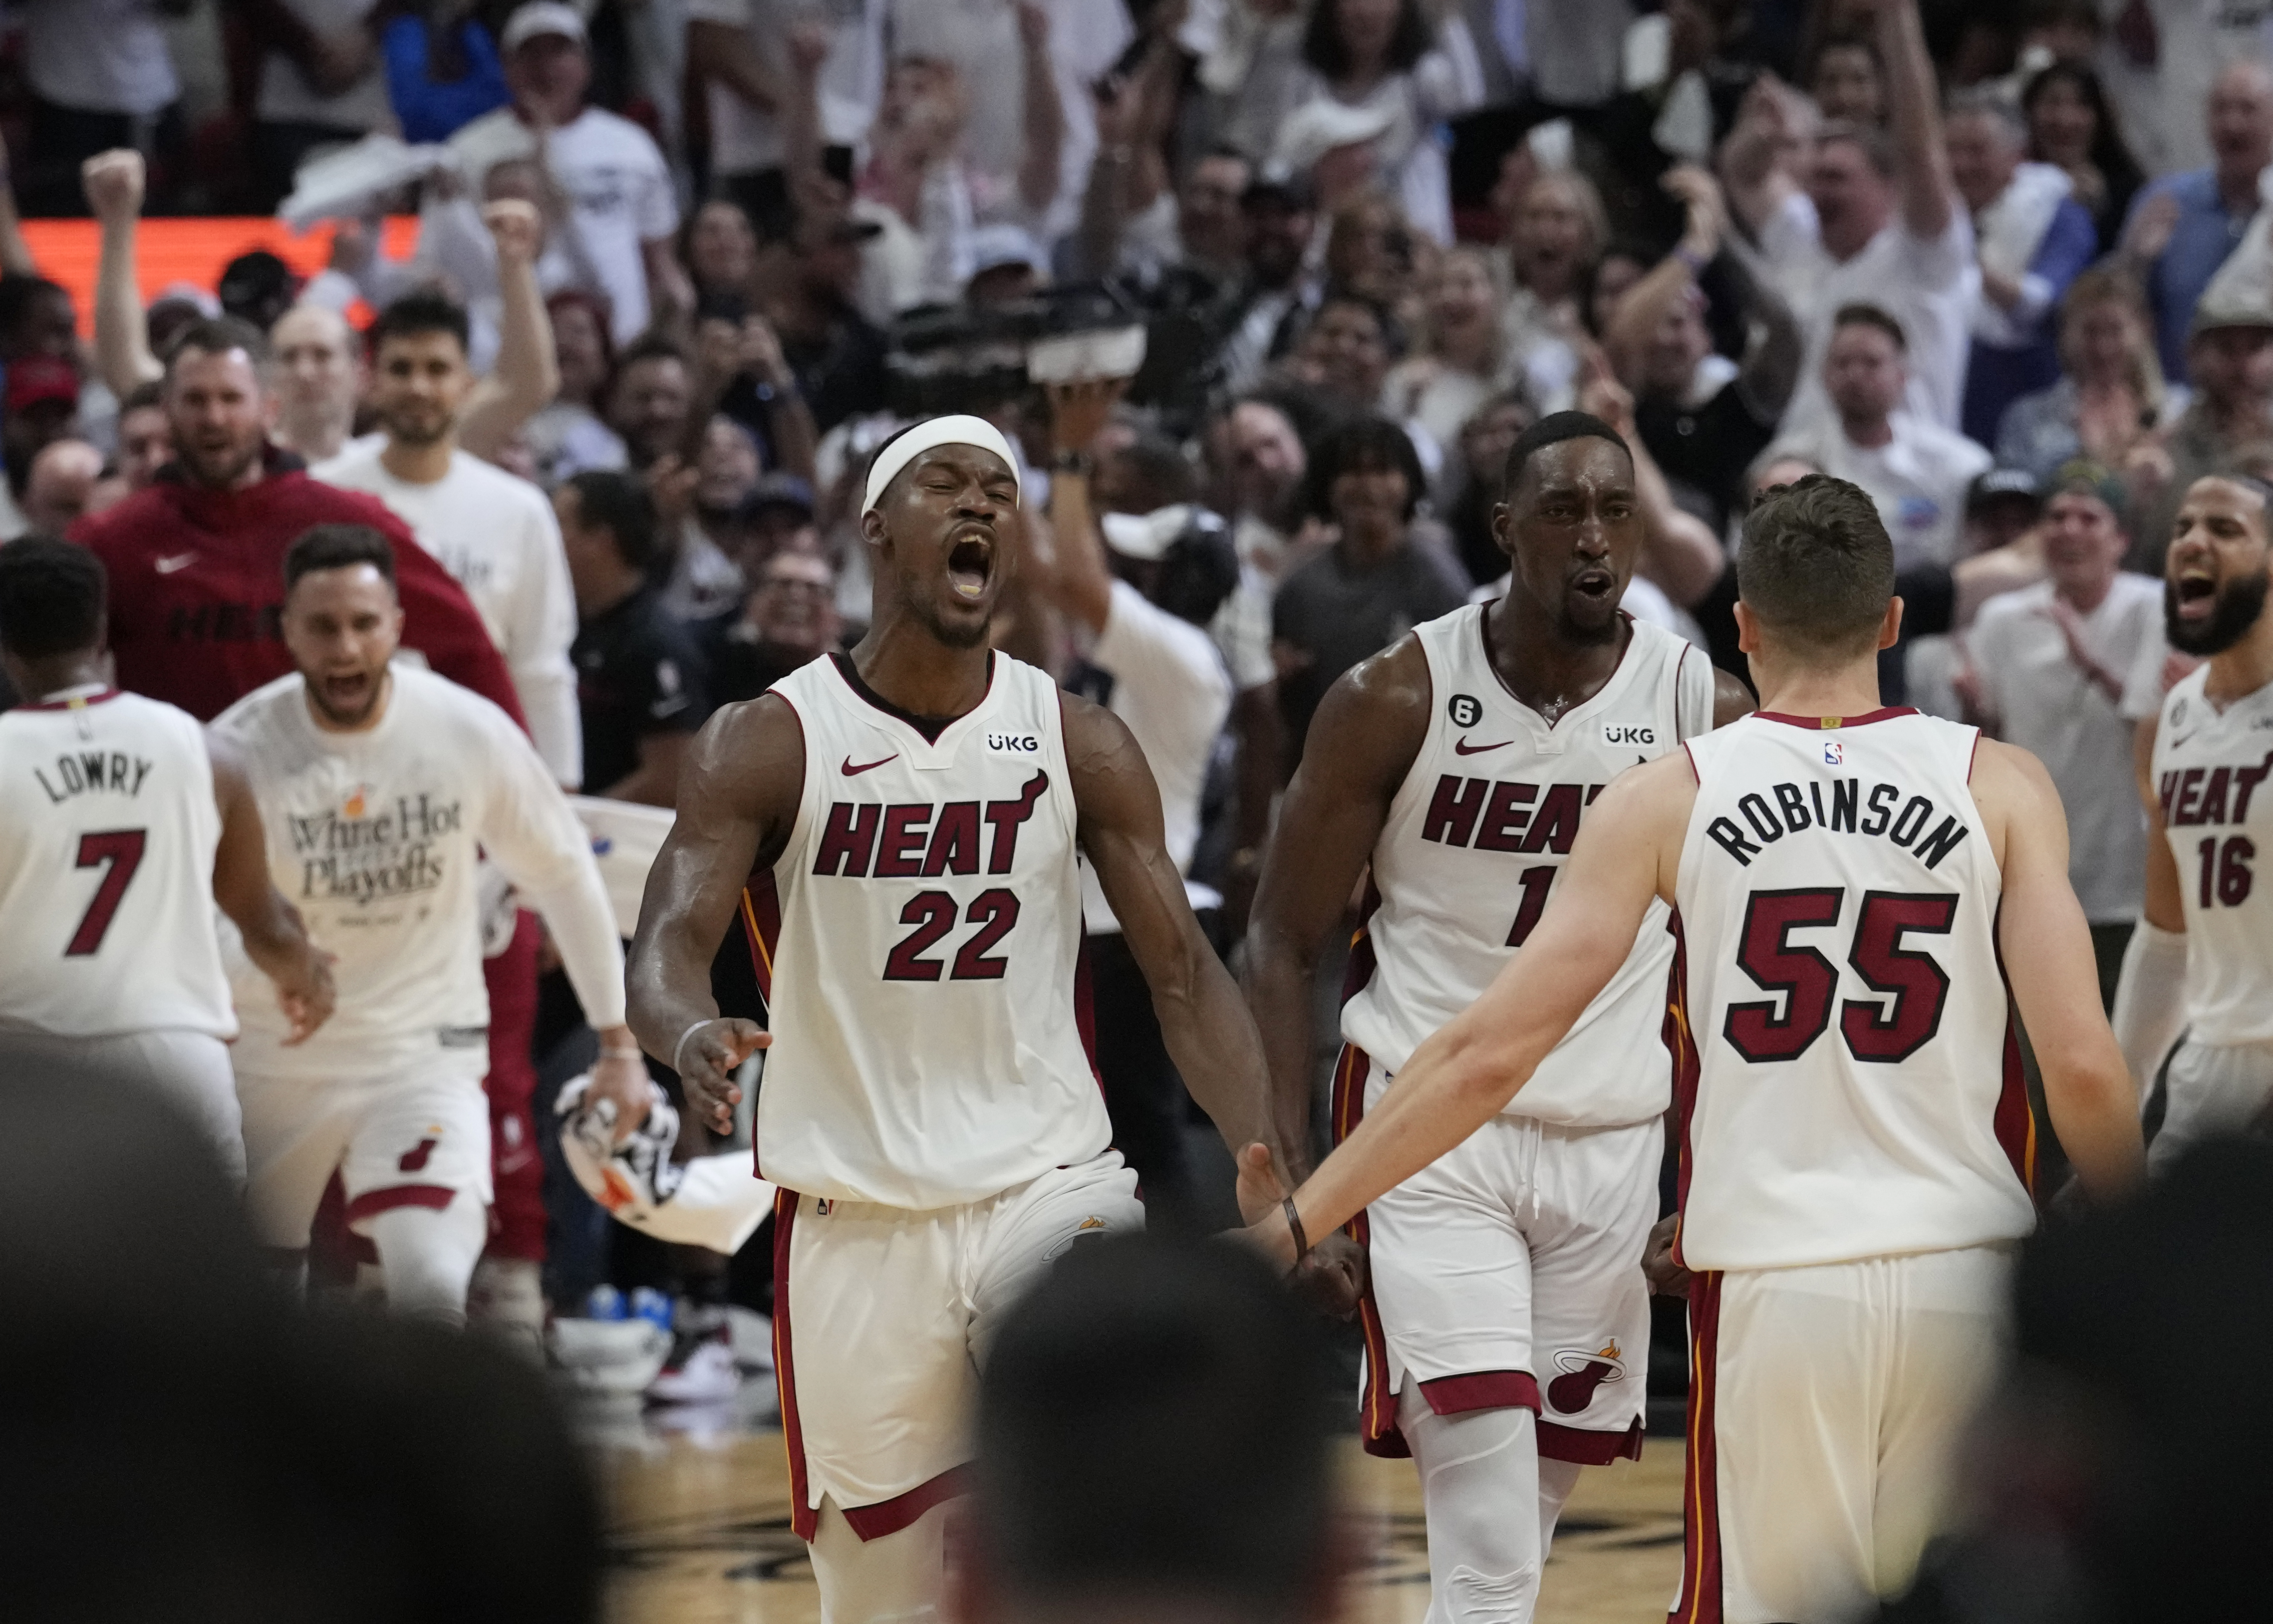 Miami Heat's undrafted working to shed that label in playoffs